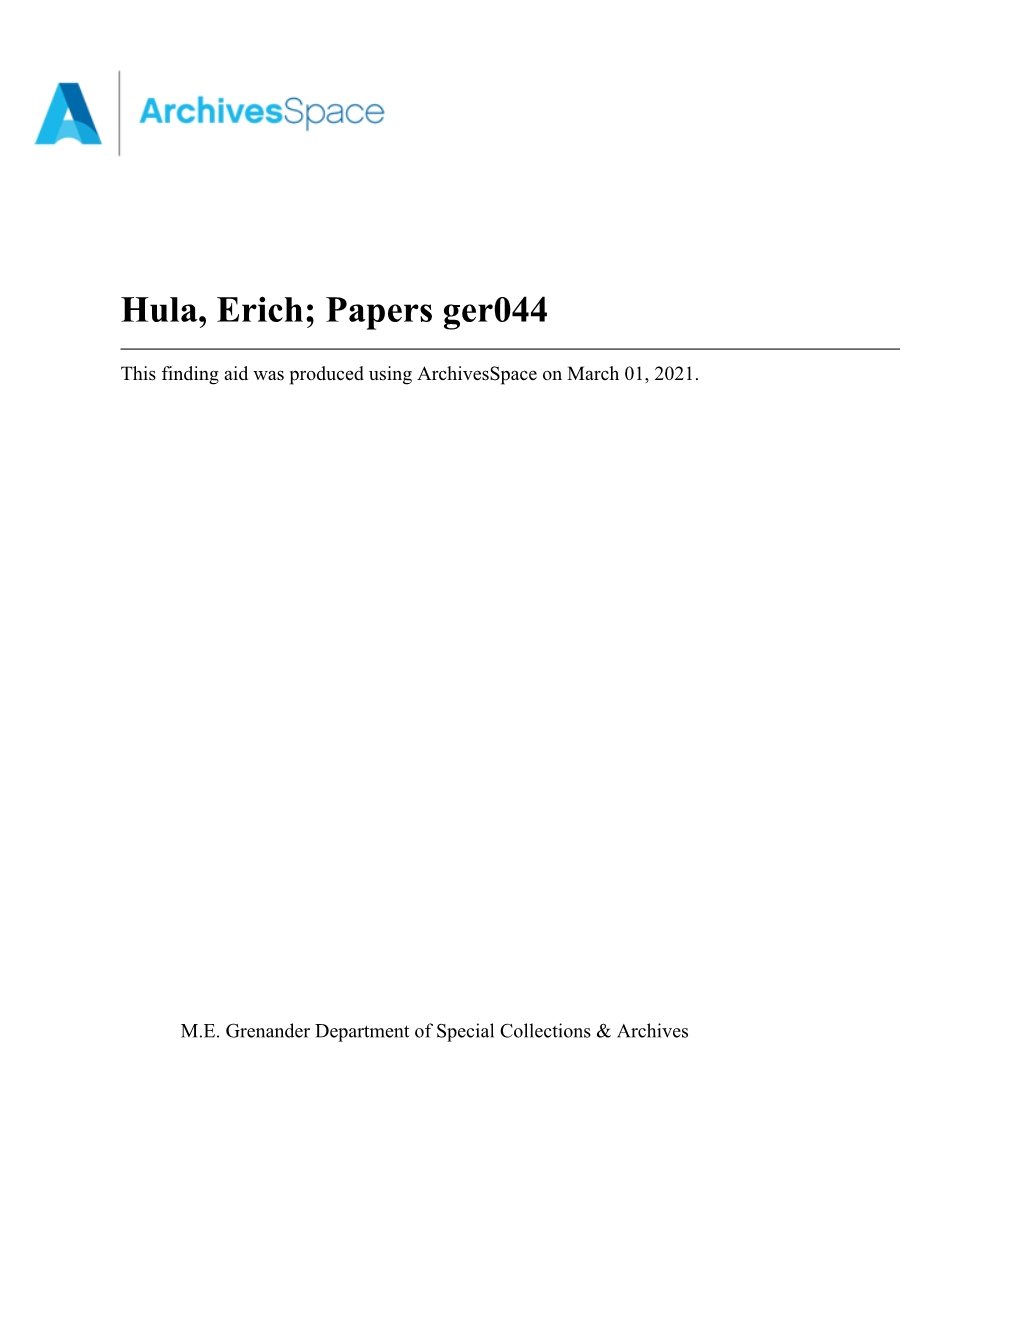 Hula, Erich; Papers Ger044